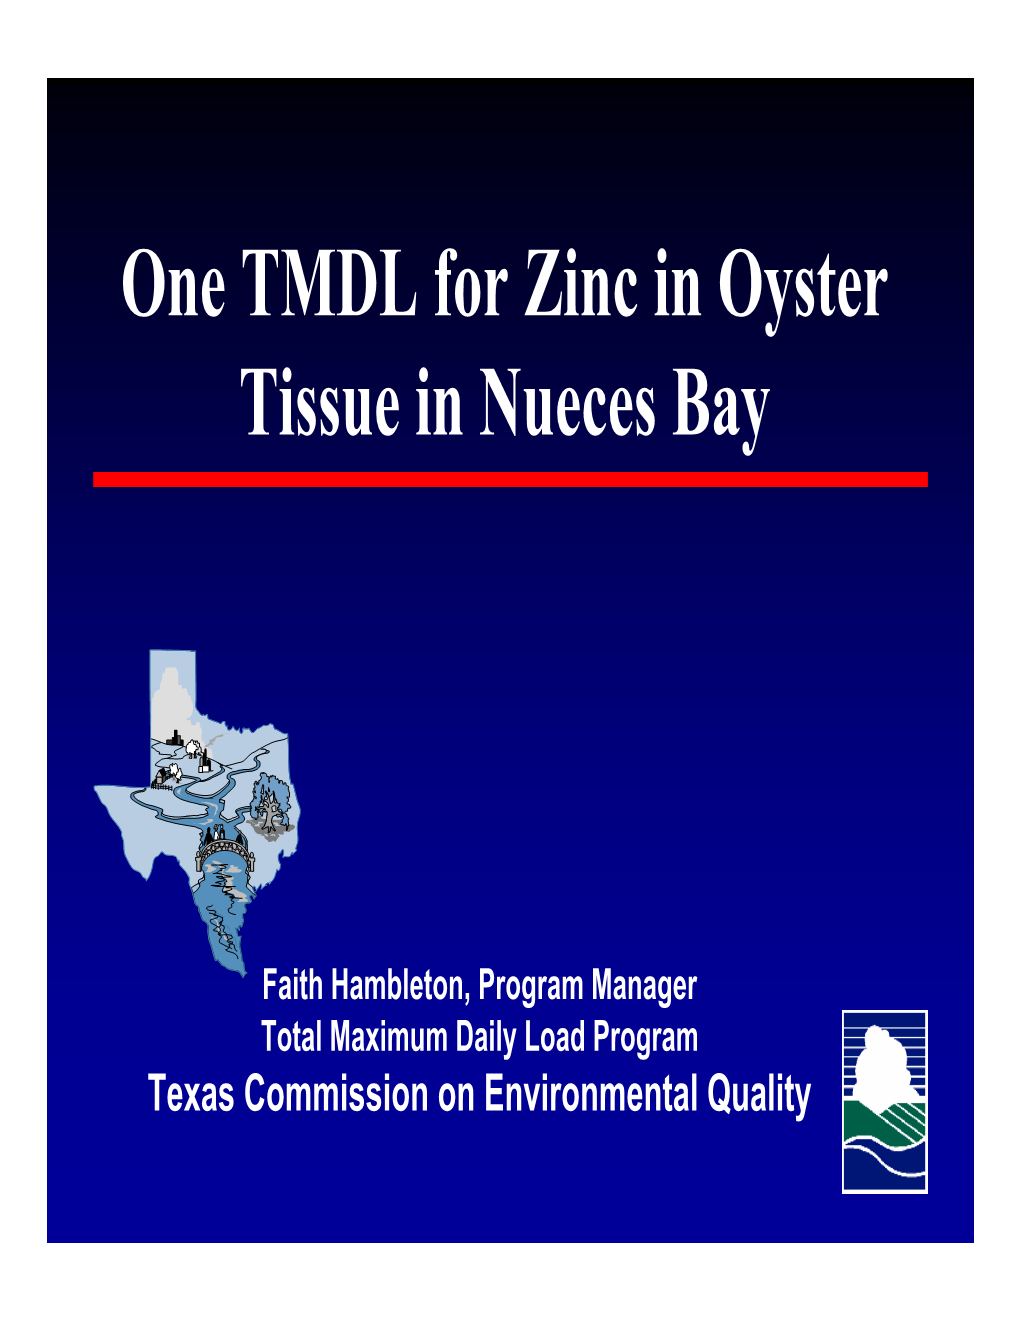 One TMDL for Zinc in Oyster Tissue in Nueces Bay